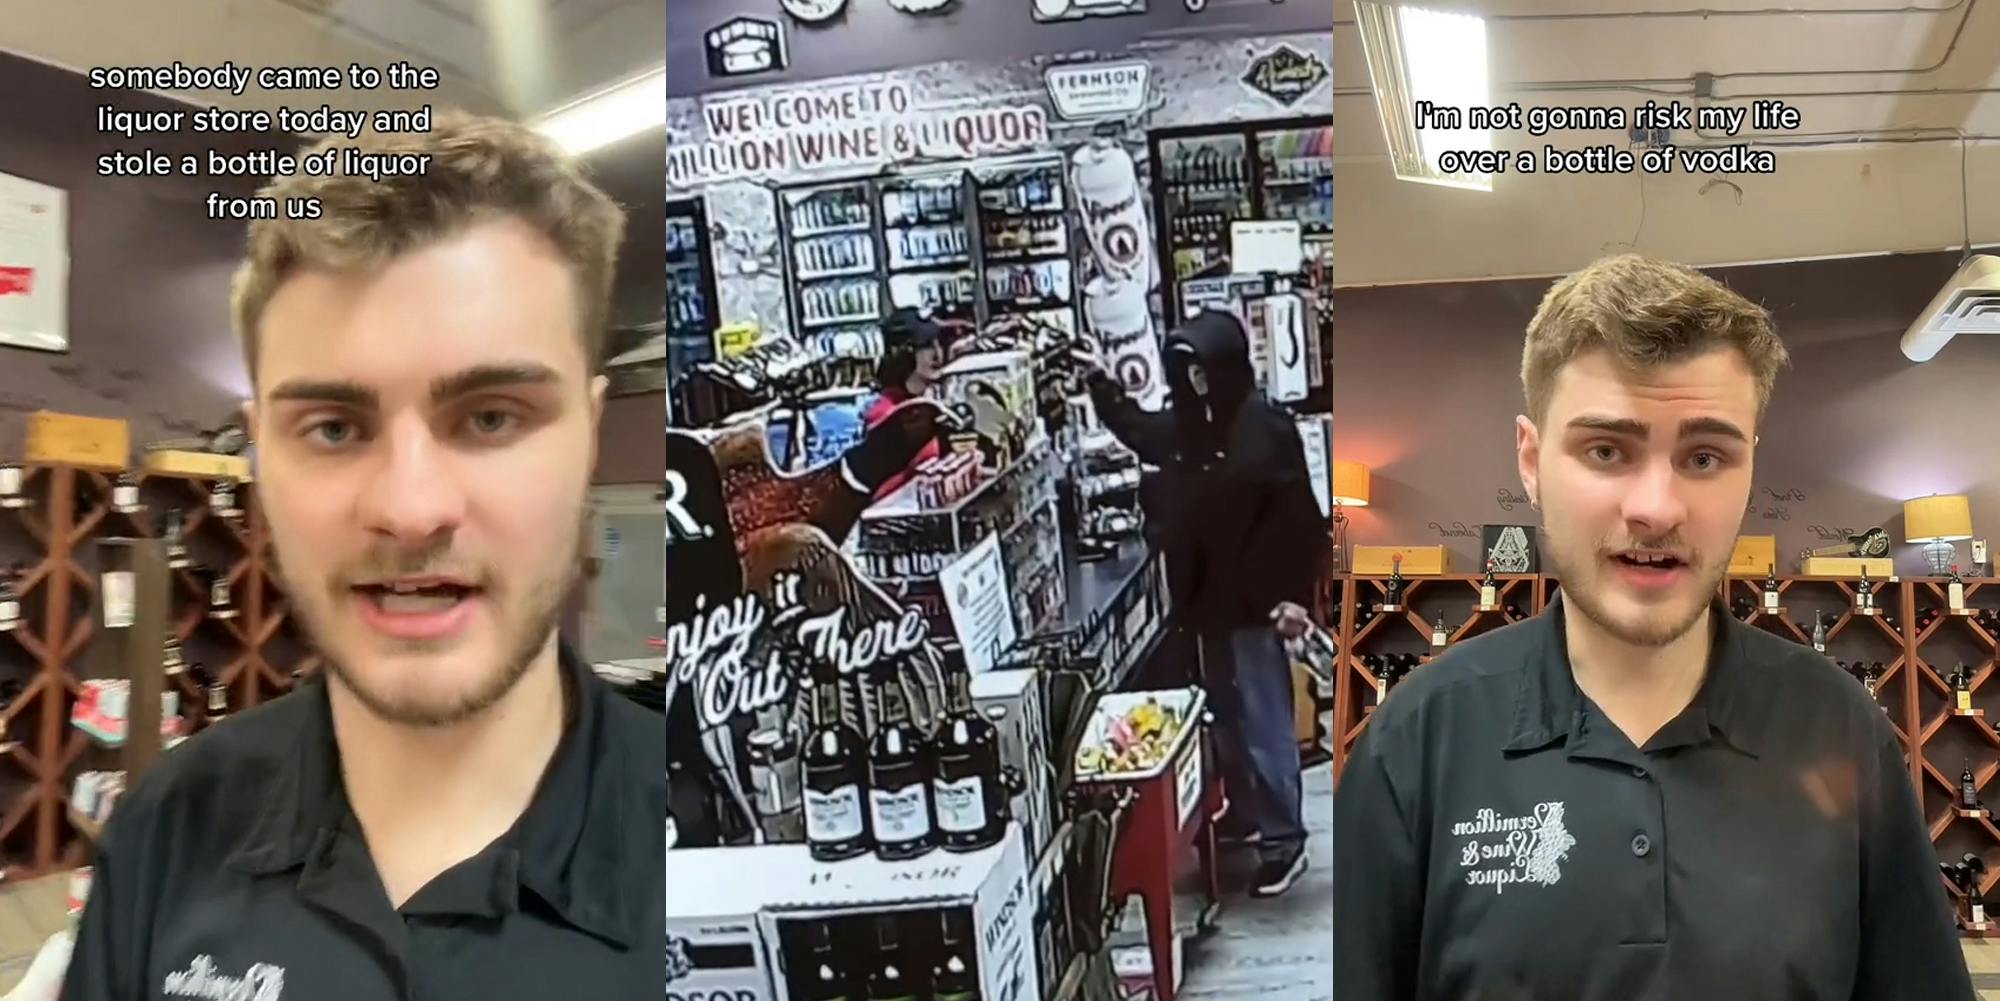 liquor store employee speaking with caption "somebody came to the liquor store today and stole a bottle of liquor from us" (l) security camera footage of robber pointing pepper spray at liquor store employee behind counter (c) liquor store employee speaking with caption "I'm not gonna risk my life over a bottle of vodka" (r)